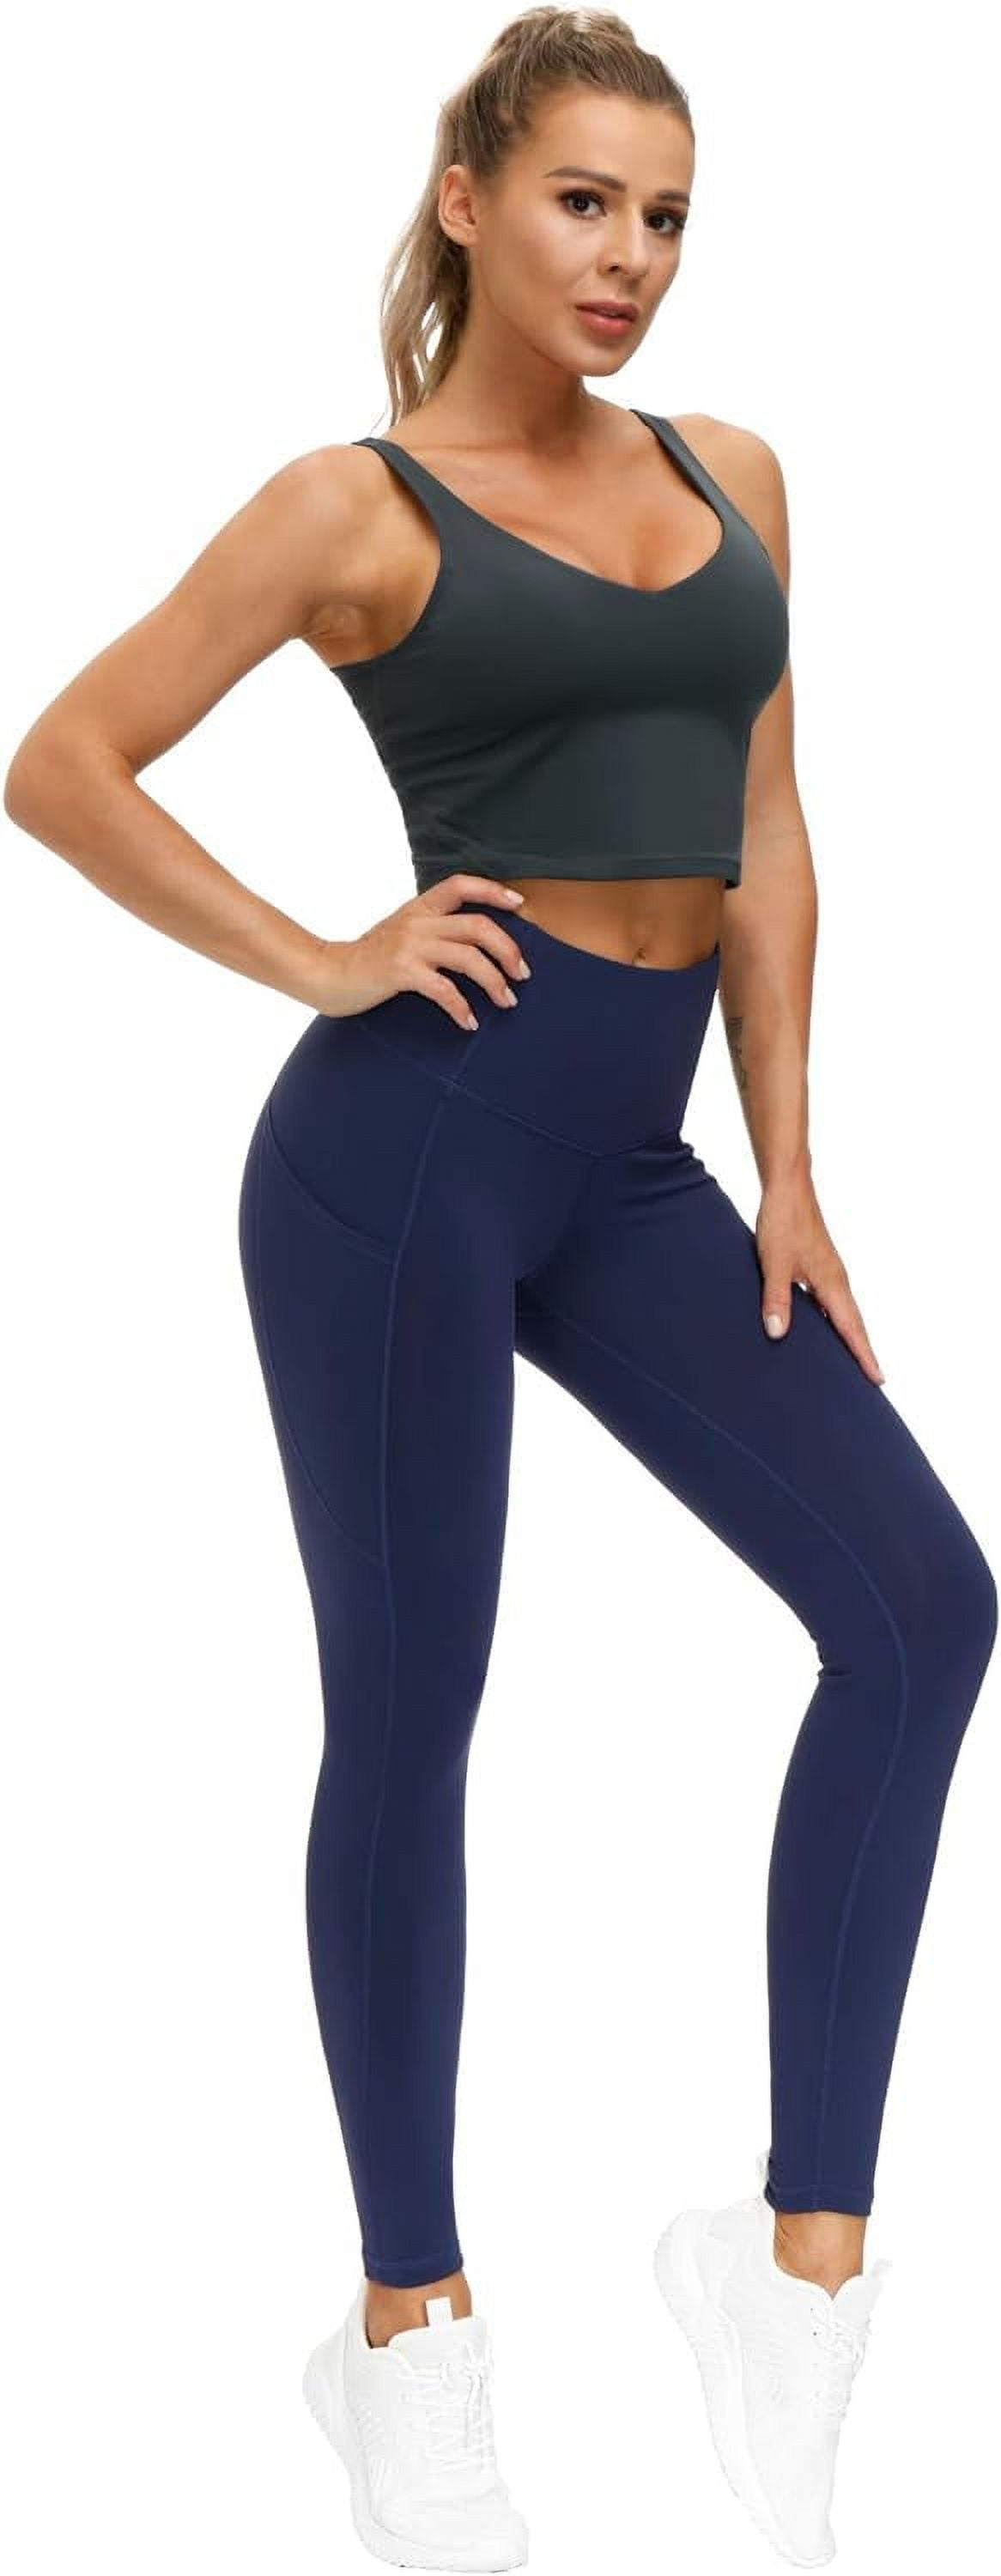 Z7017 THE GYM PEOPLE Thick High Waist Yoga Pants with Pockets, Tummy Control  Workout Running Yoga Leggings for Women